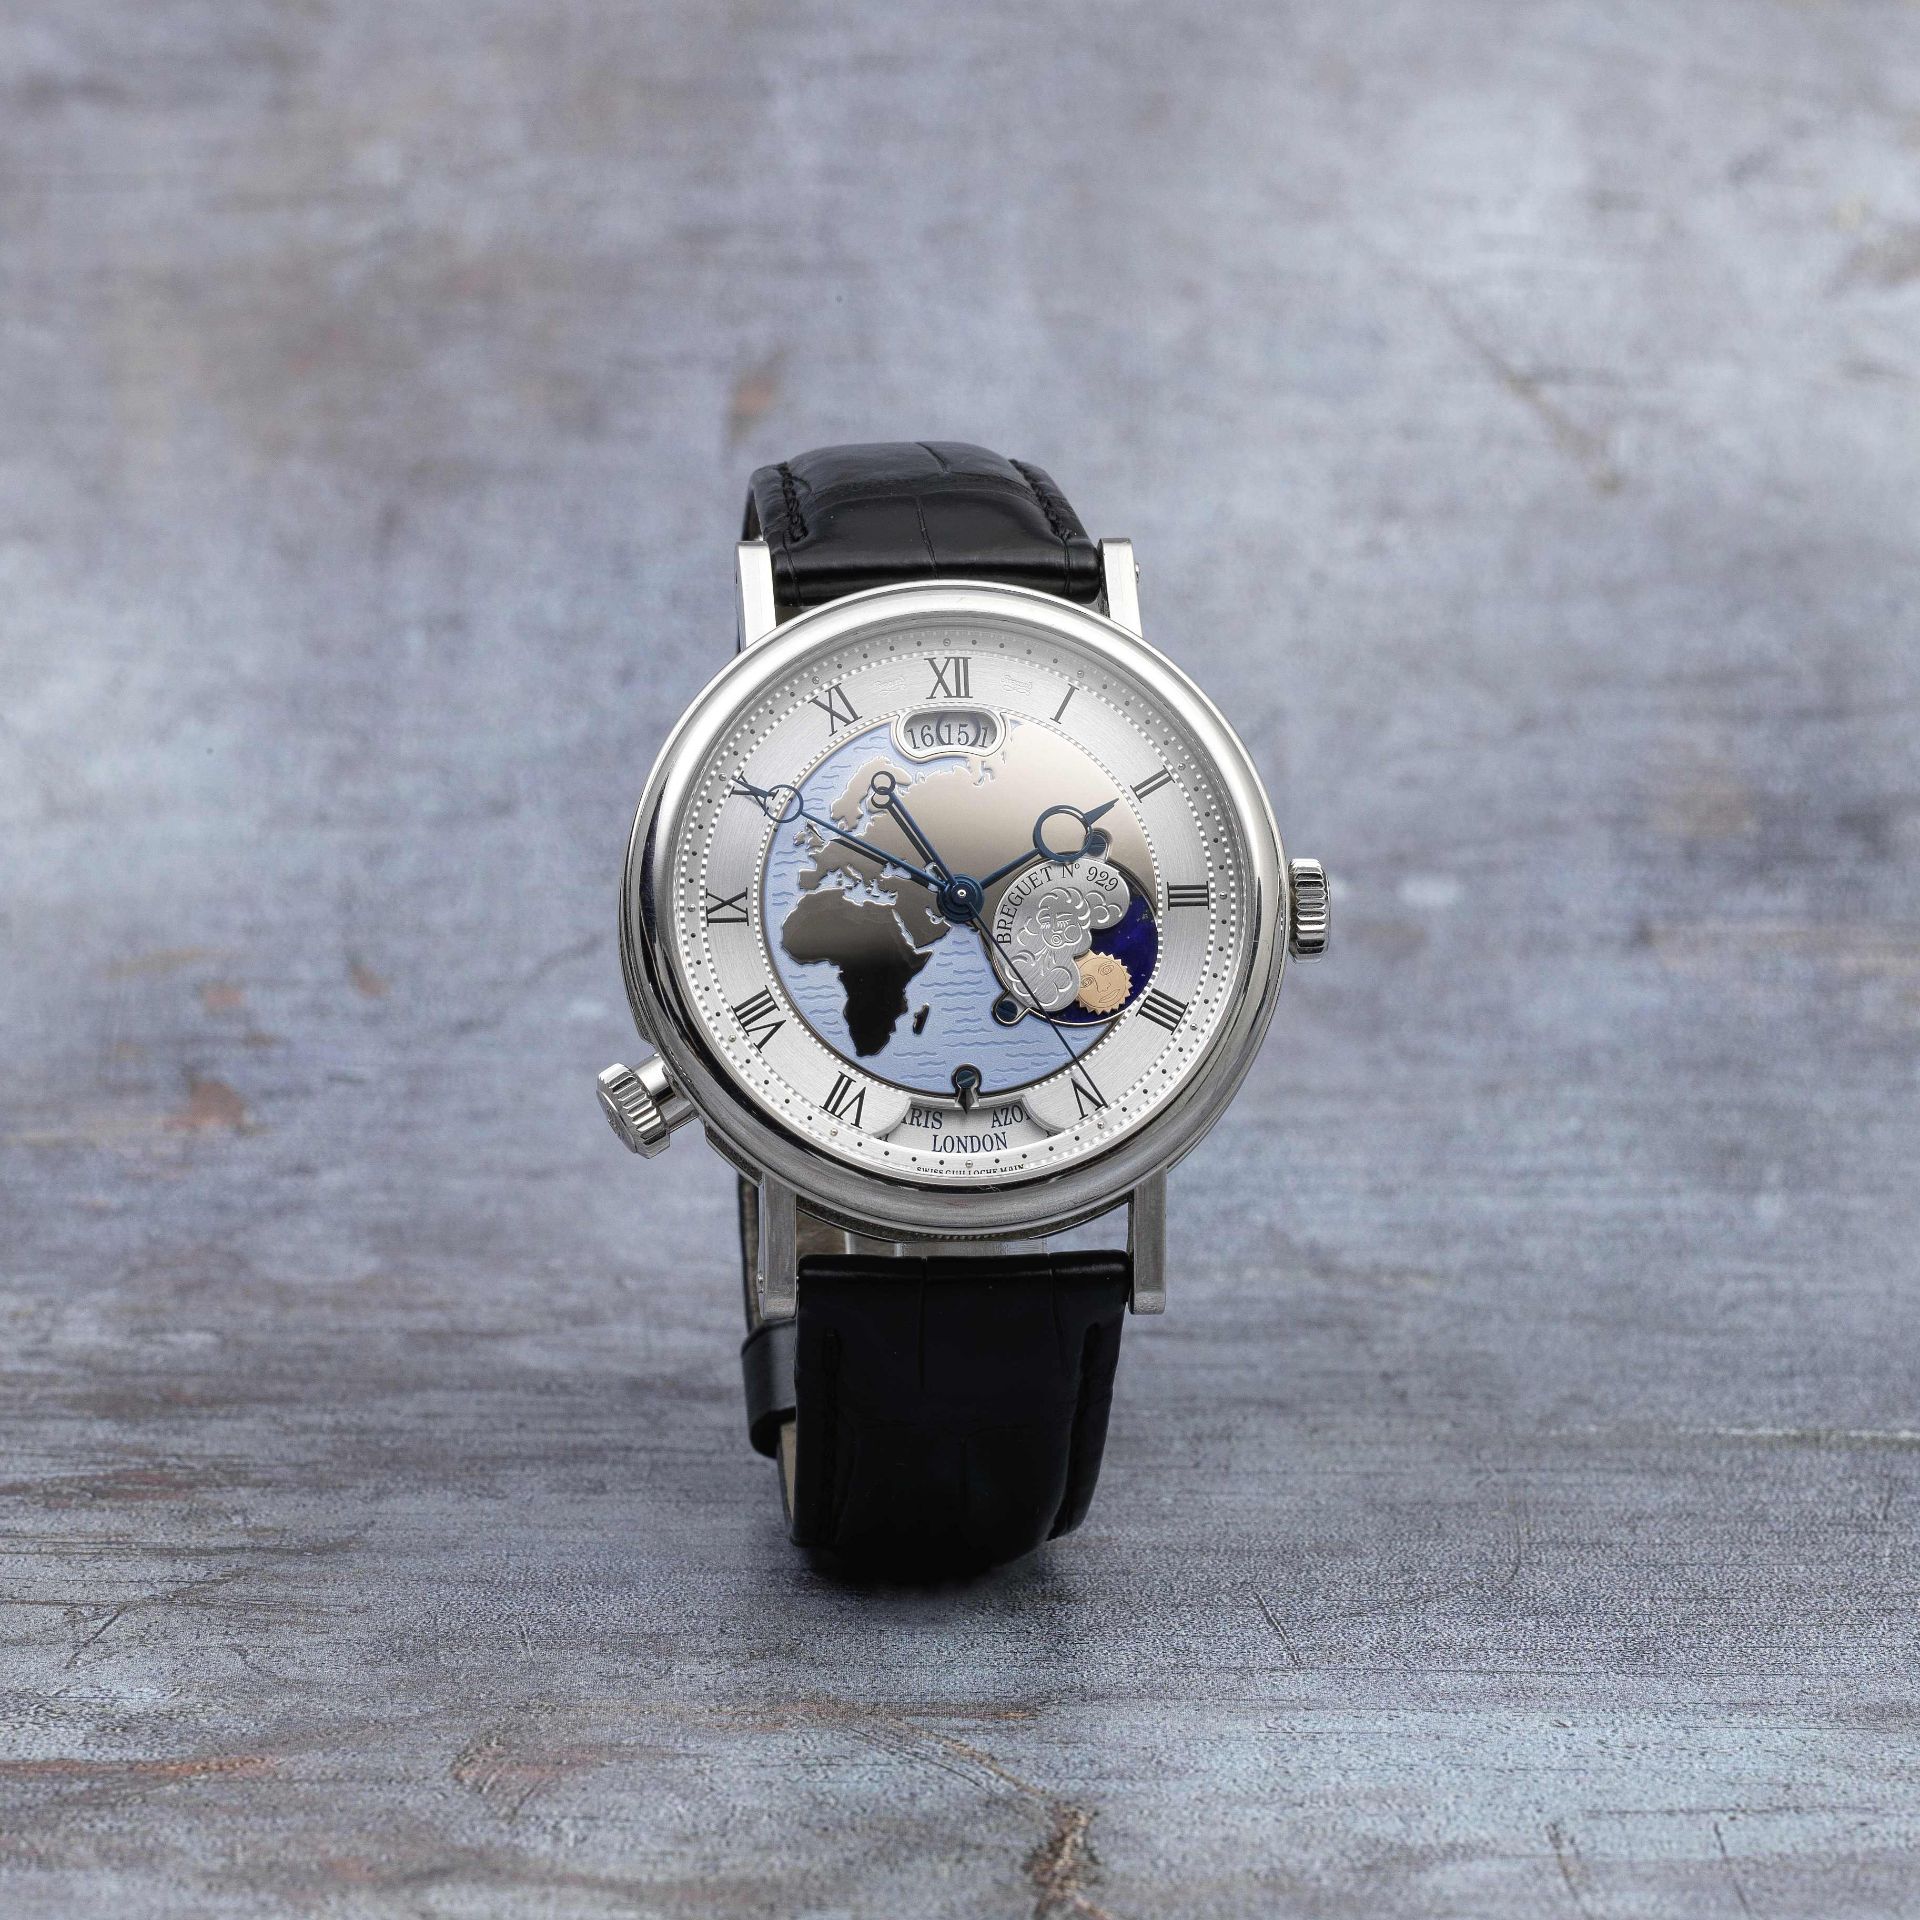 Breguet. A fine platinum automatic calendar wristwatch with world time and day/night indication ...